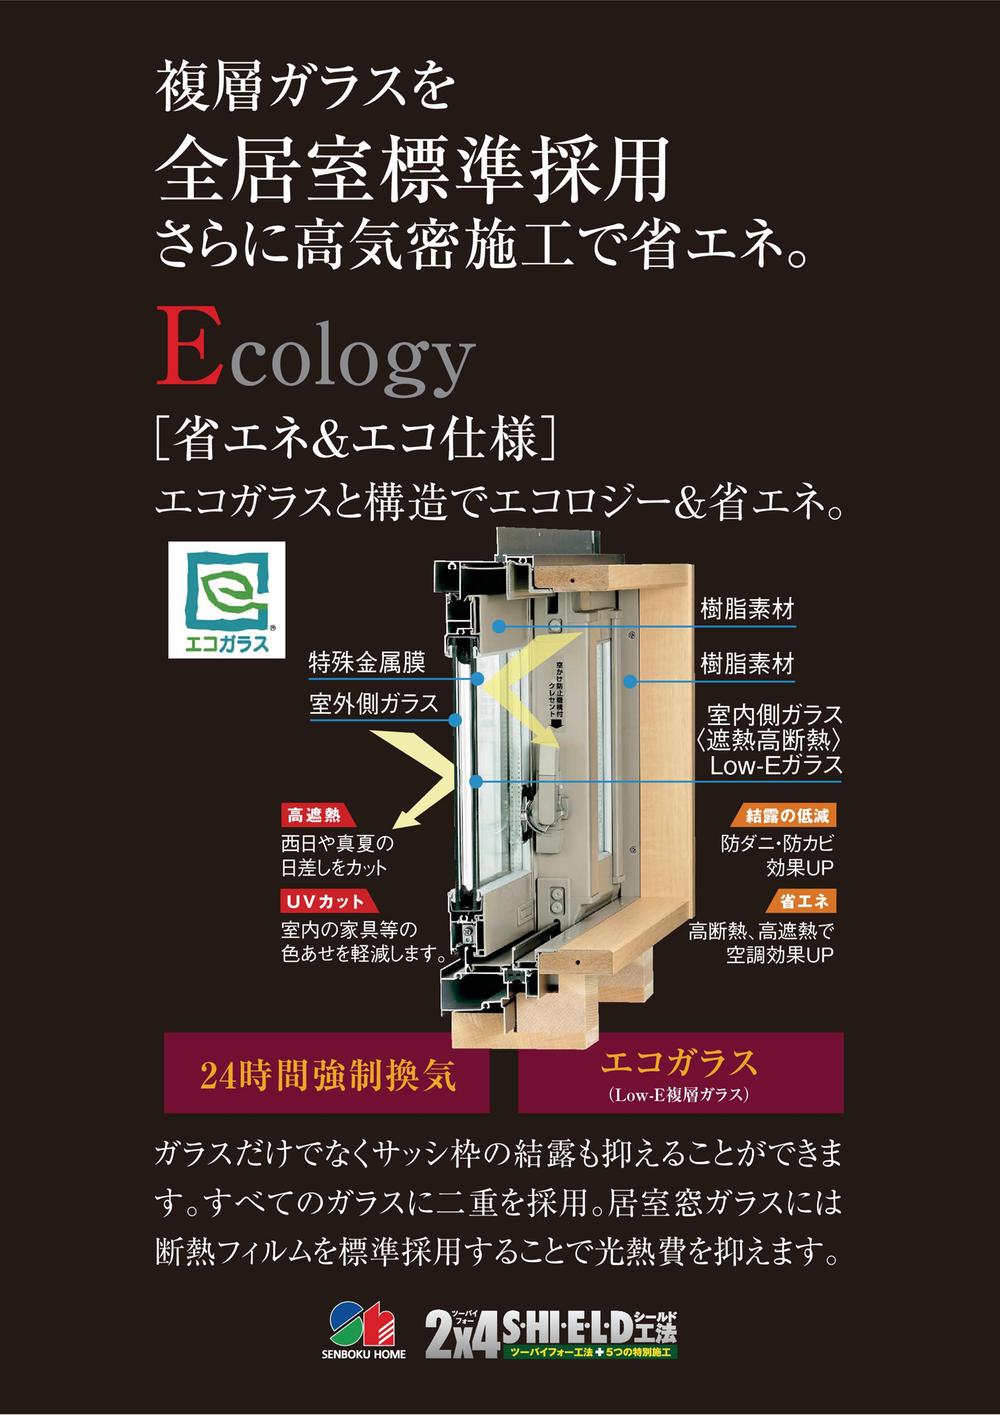 Construction ・ Construction method ・ specification. Energy saving ・ Eco-specification